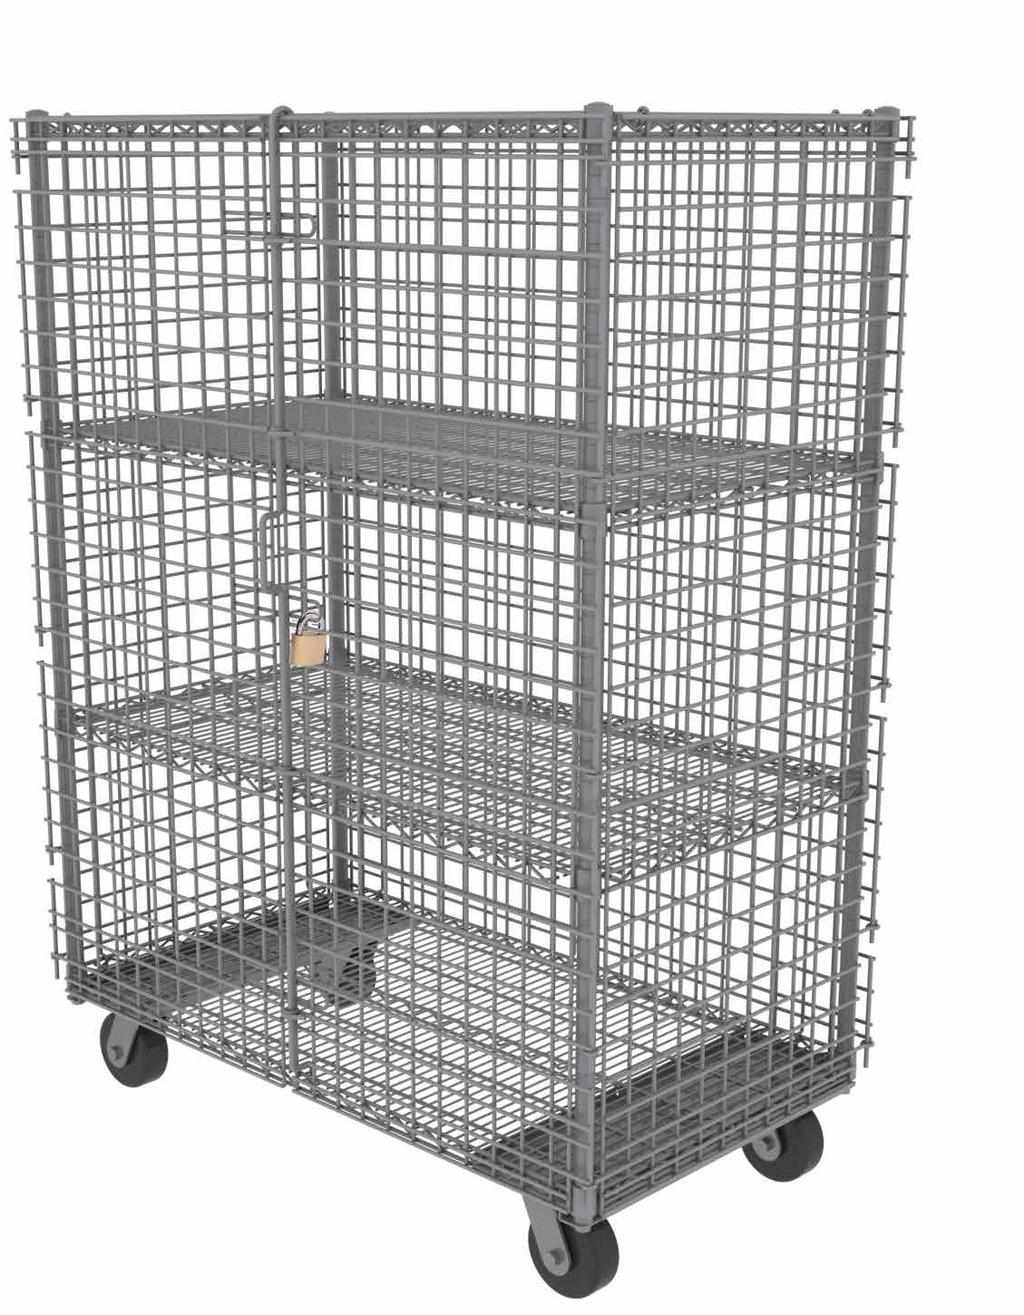 MOBILE SECURITY CAGES This cart allows you to sort and transport a wide range of products, all while keeping them secured and locked up